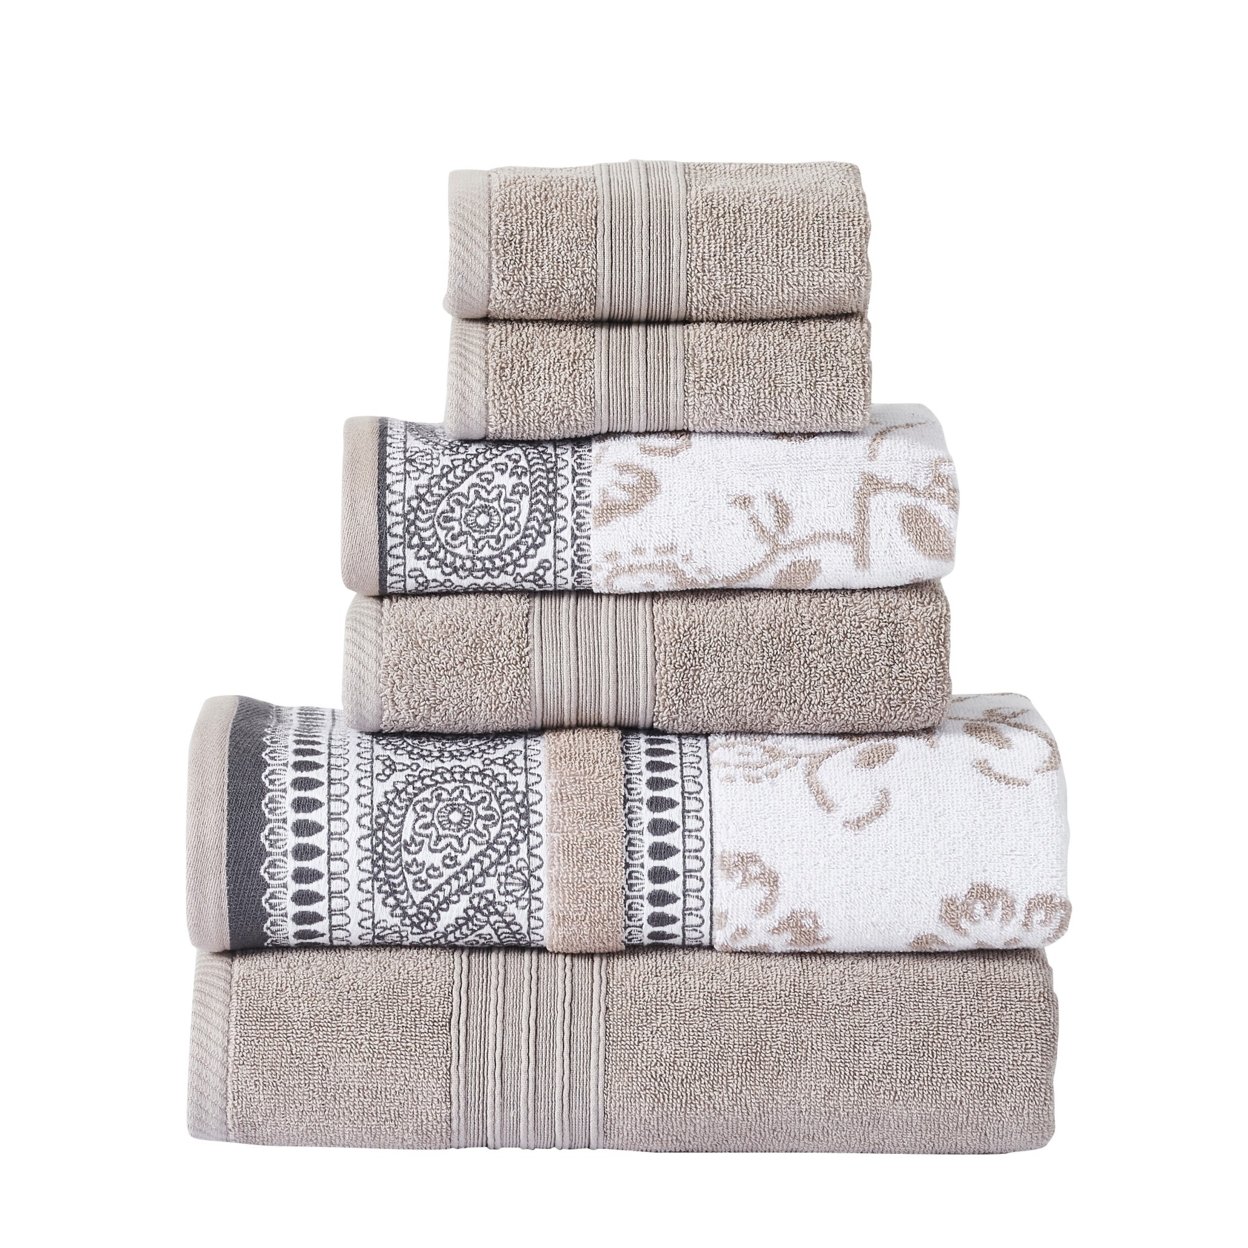 Veria 6 Piece Towel Set With Paisley And Floral Motif Pattern The Urban Port, Beige- Saltoro Sherpi